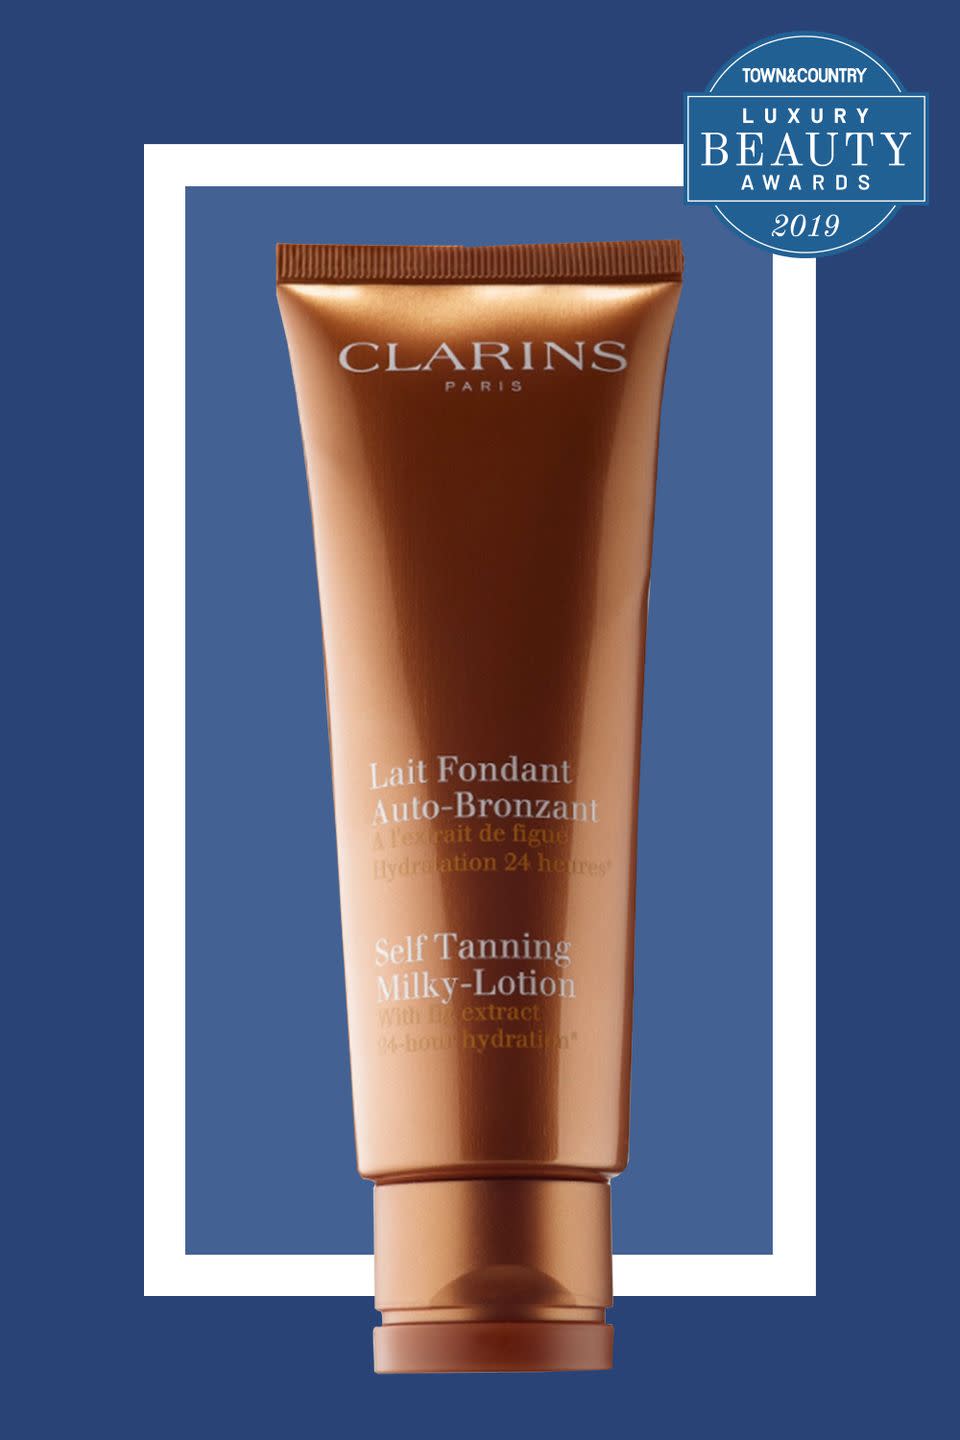 Best Self Tanner for Face: Clarins Self Tanning Milky Lotion